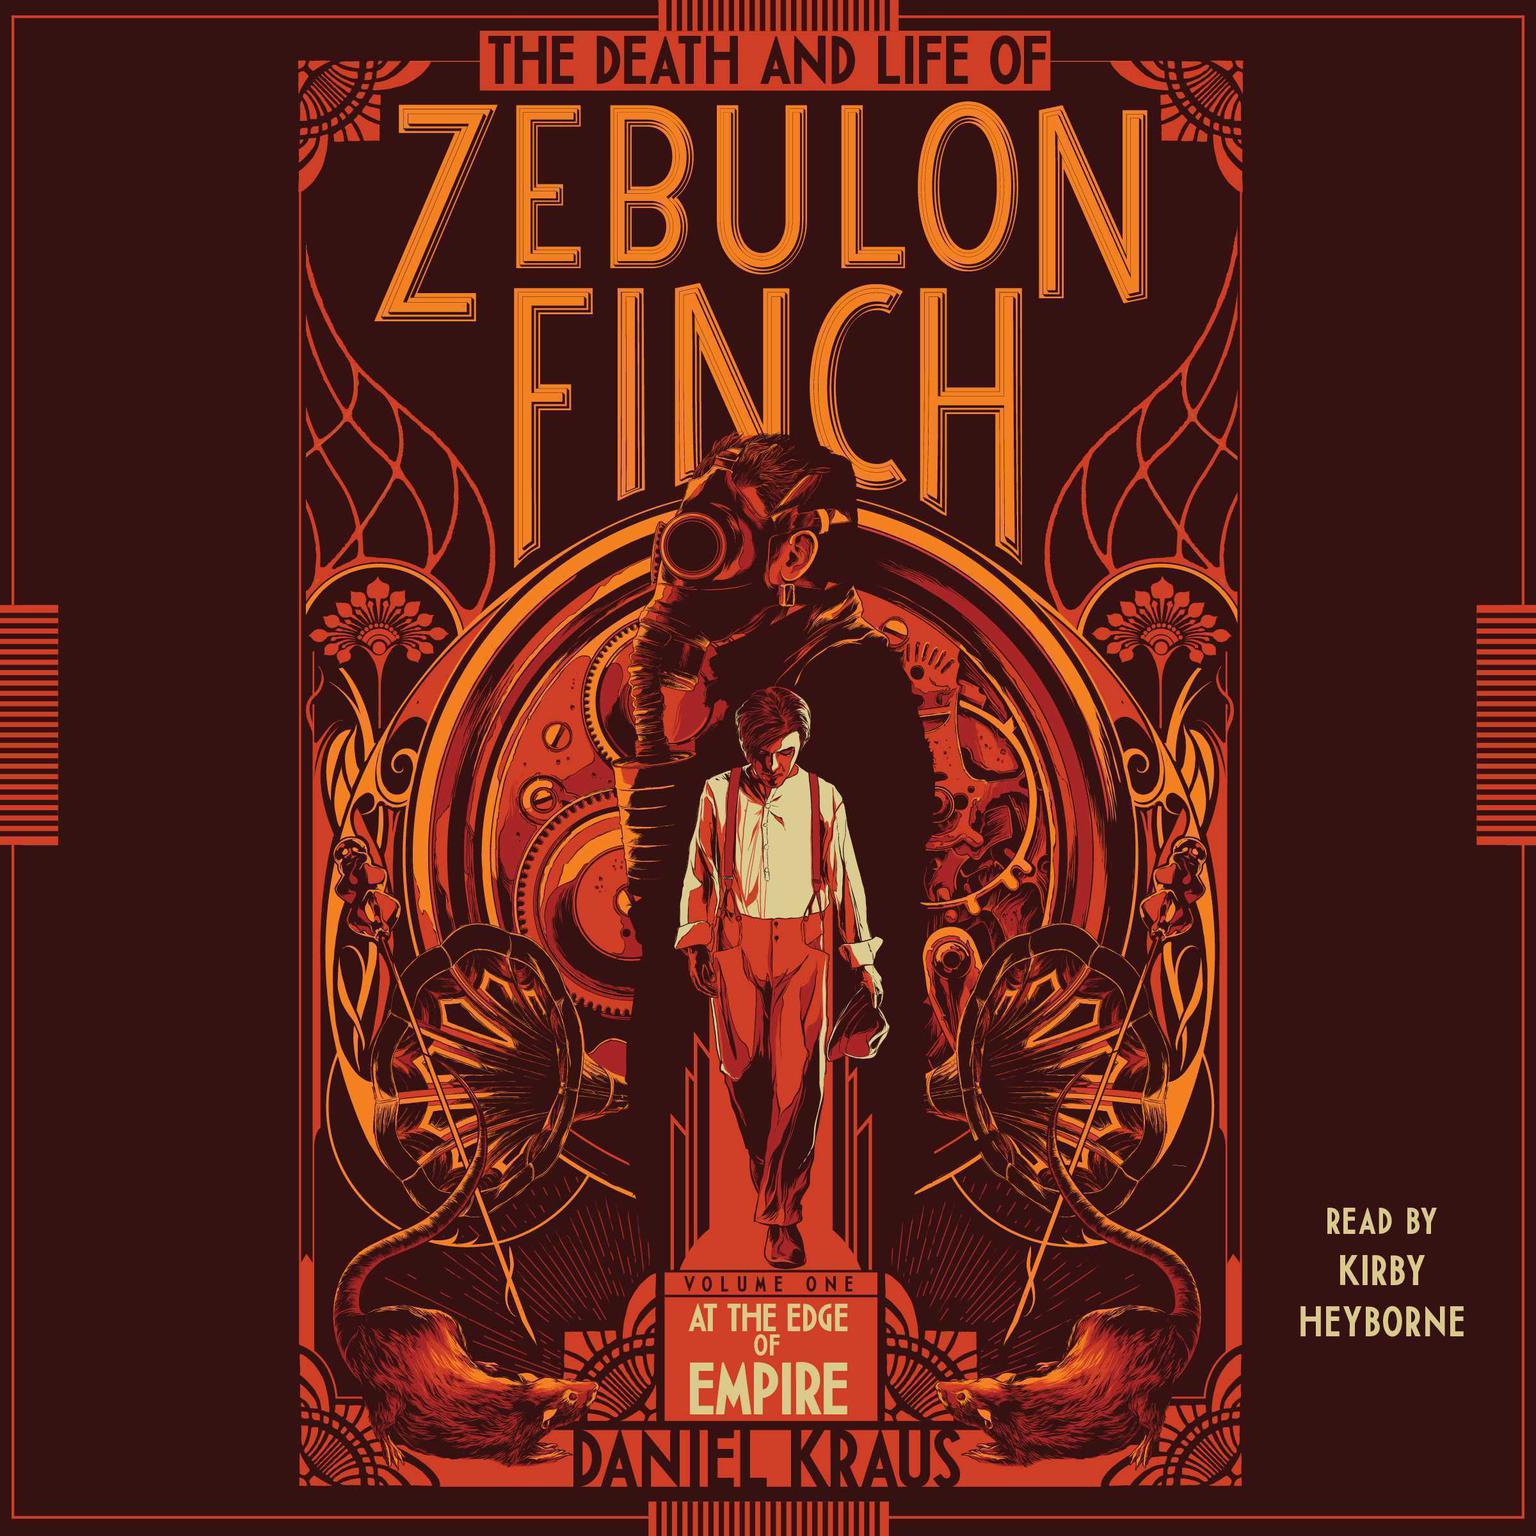 The Death and Life of Zebulon Finch, Volume One: At the Edge of Empire Audiobook, by Daniel Kraus